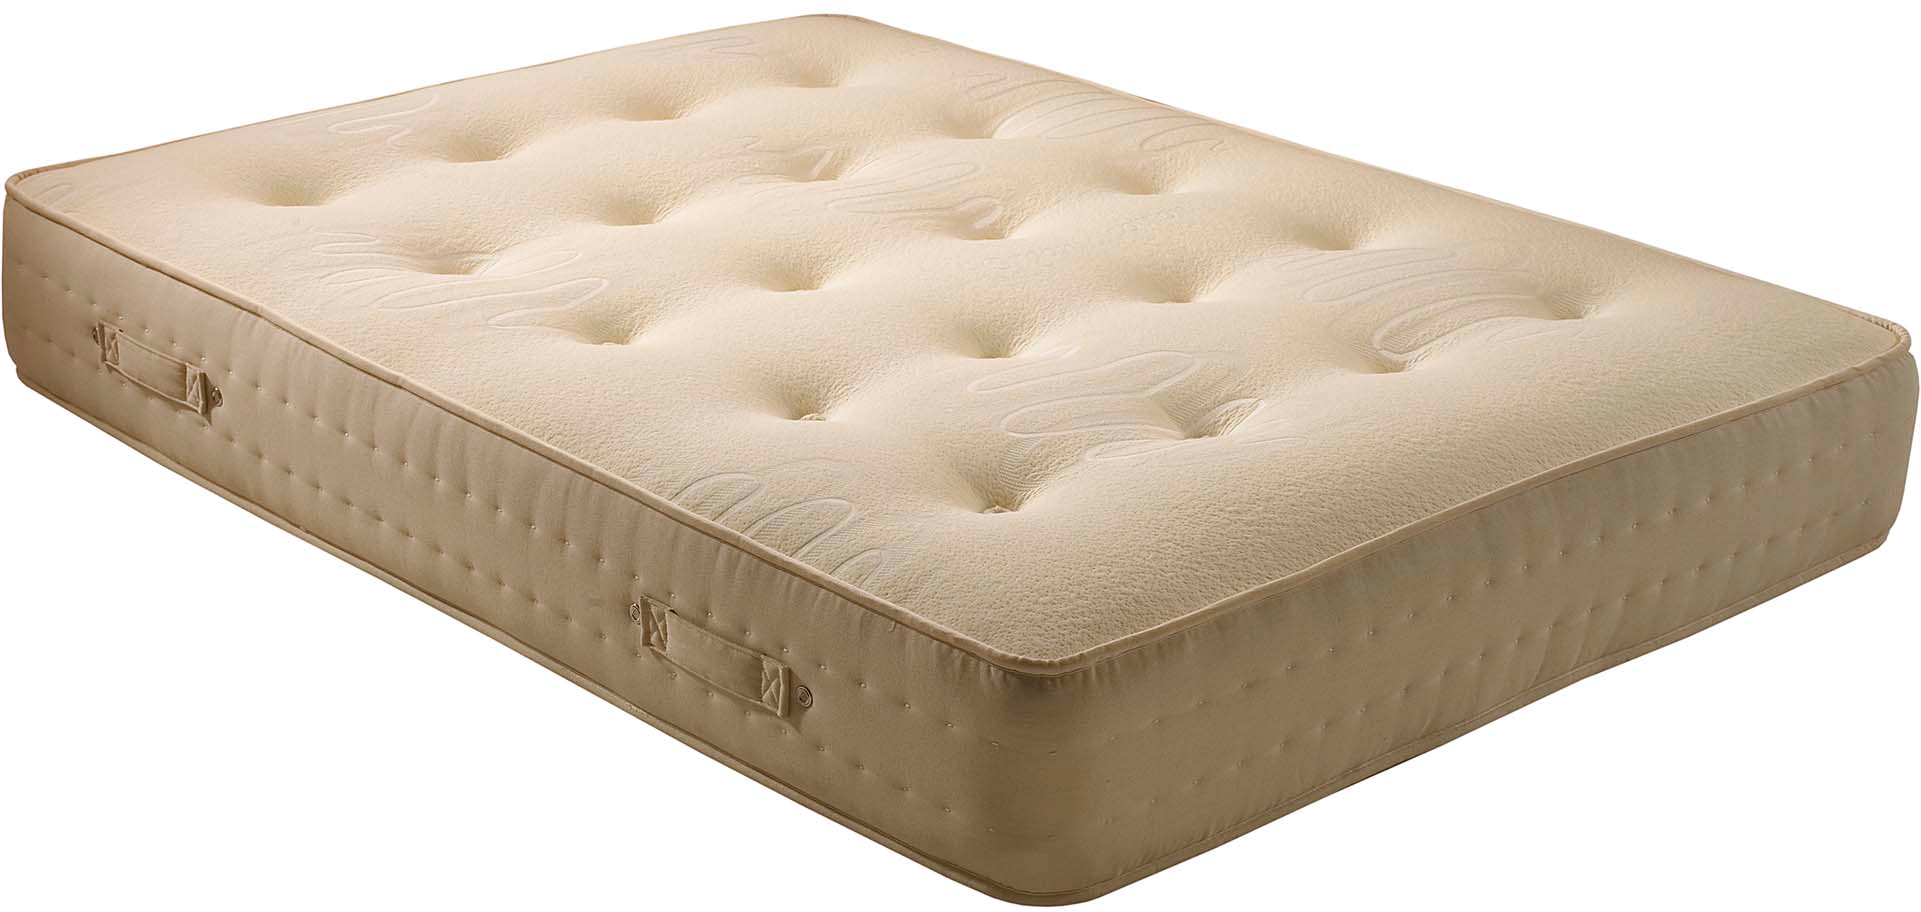 Mattress Free Download Png   Mattress Hd Png - Of A Bed, Transparent background PNG HD thumbnail